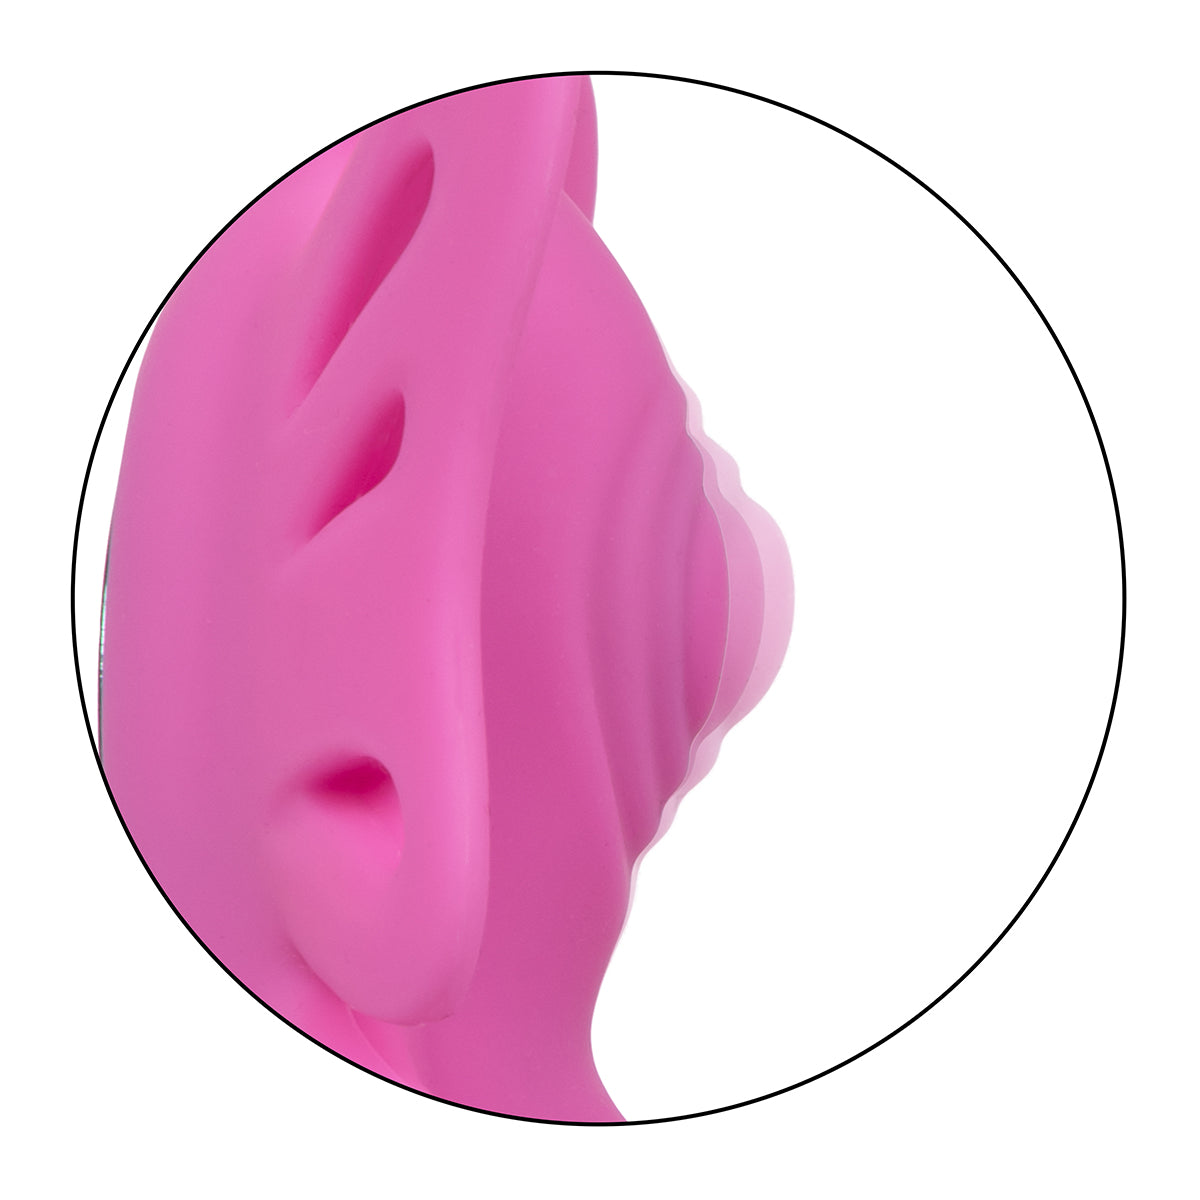 Calexotics - Venus Butterfly Silicone Remote Pulsating G